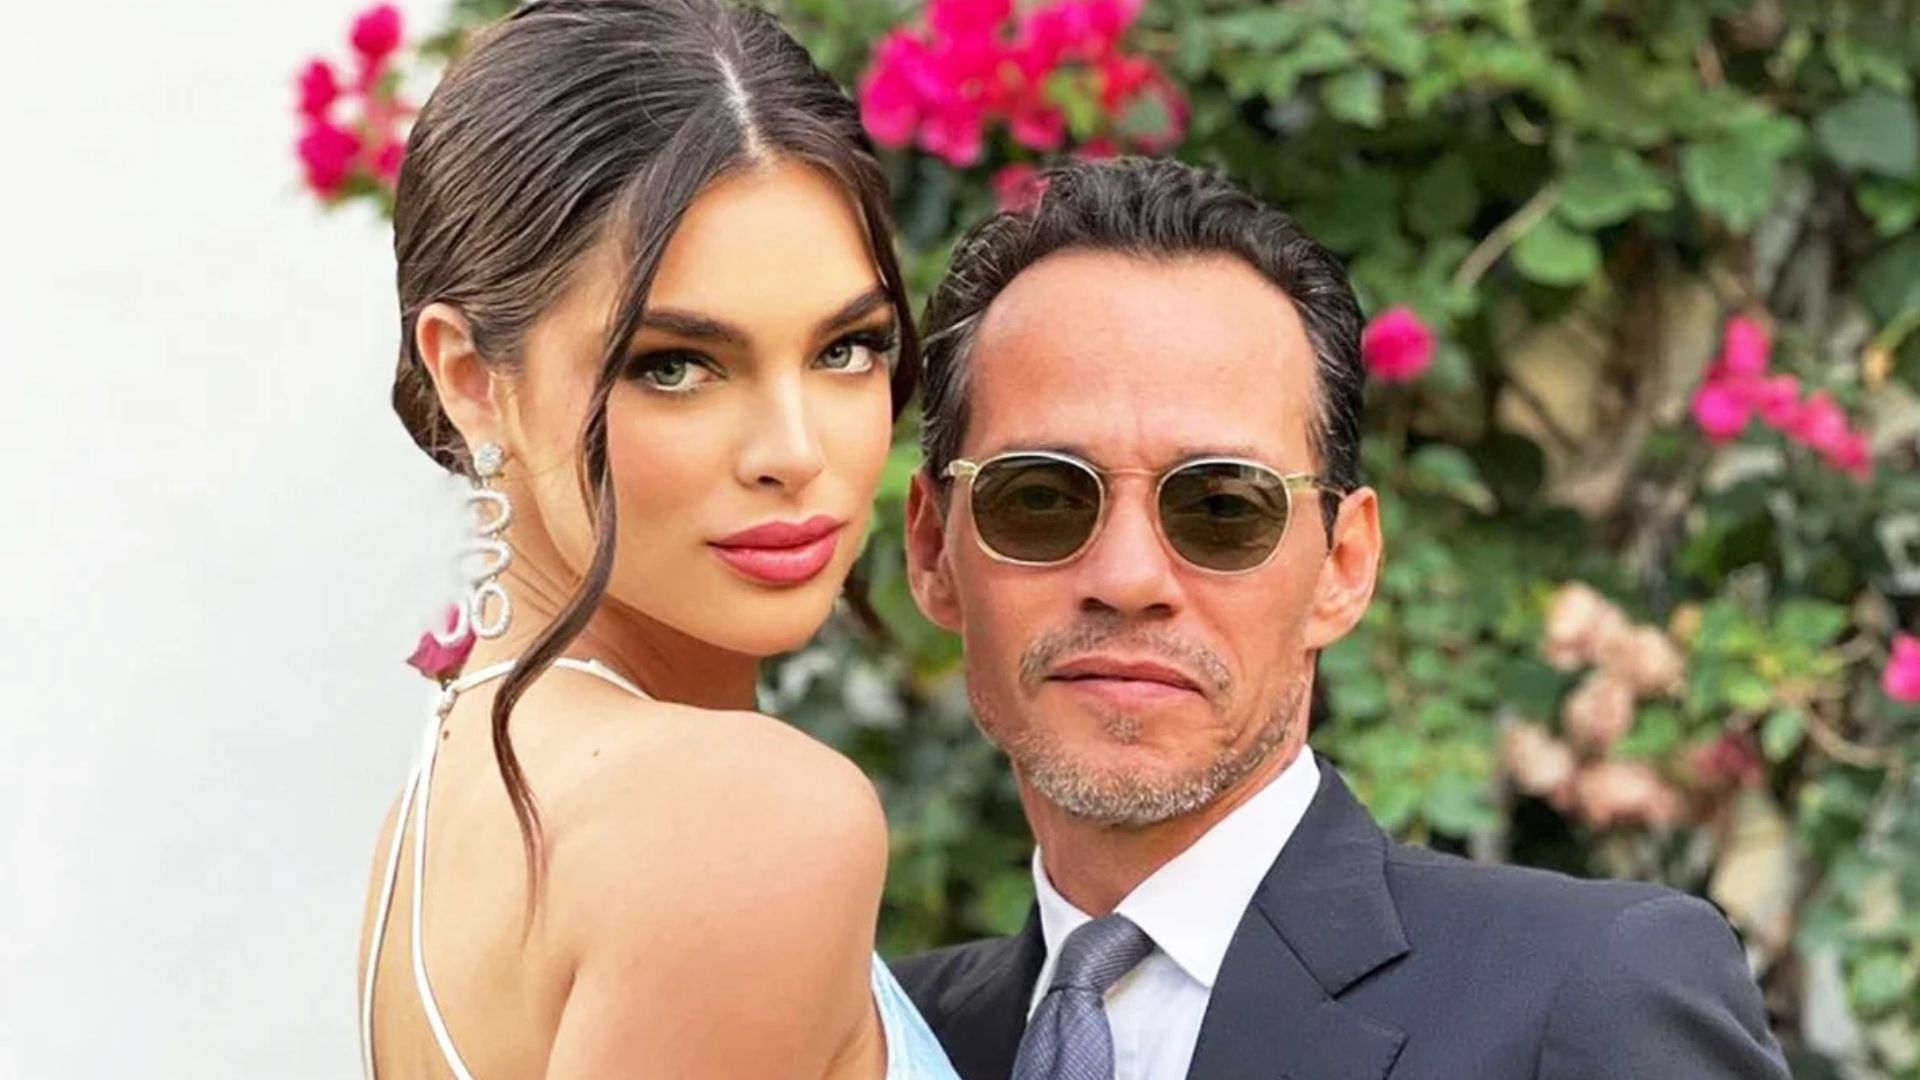 Nadia Ferreira, a former Miss Universe contestant, is engaged to Marc Anthony